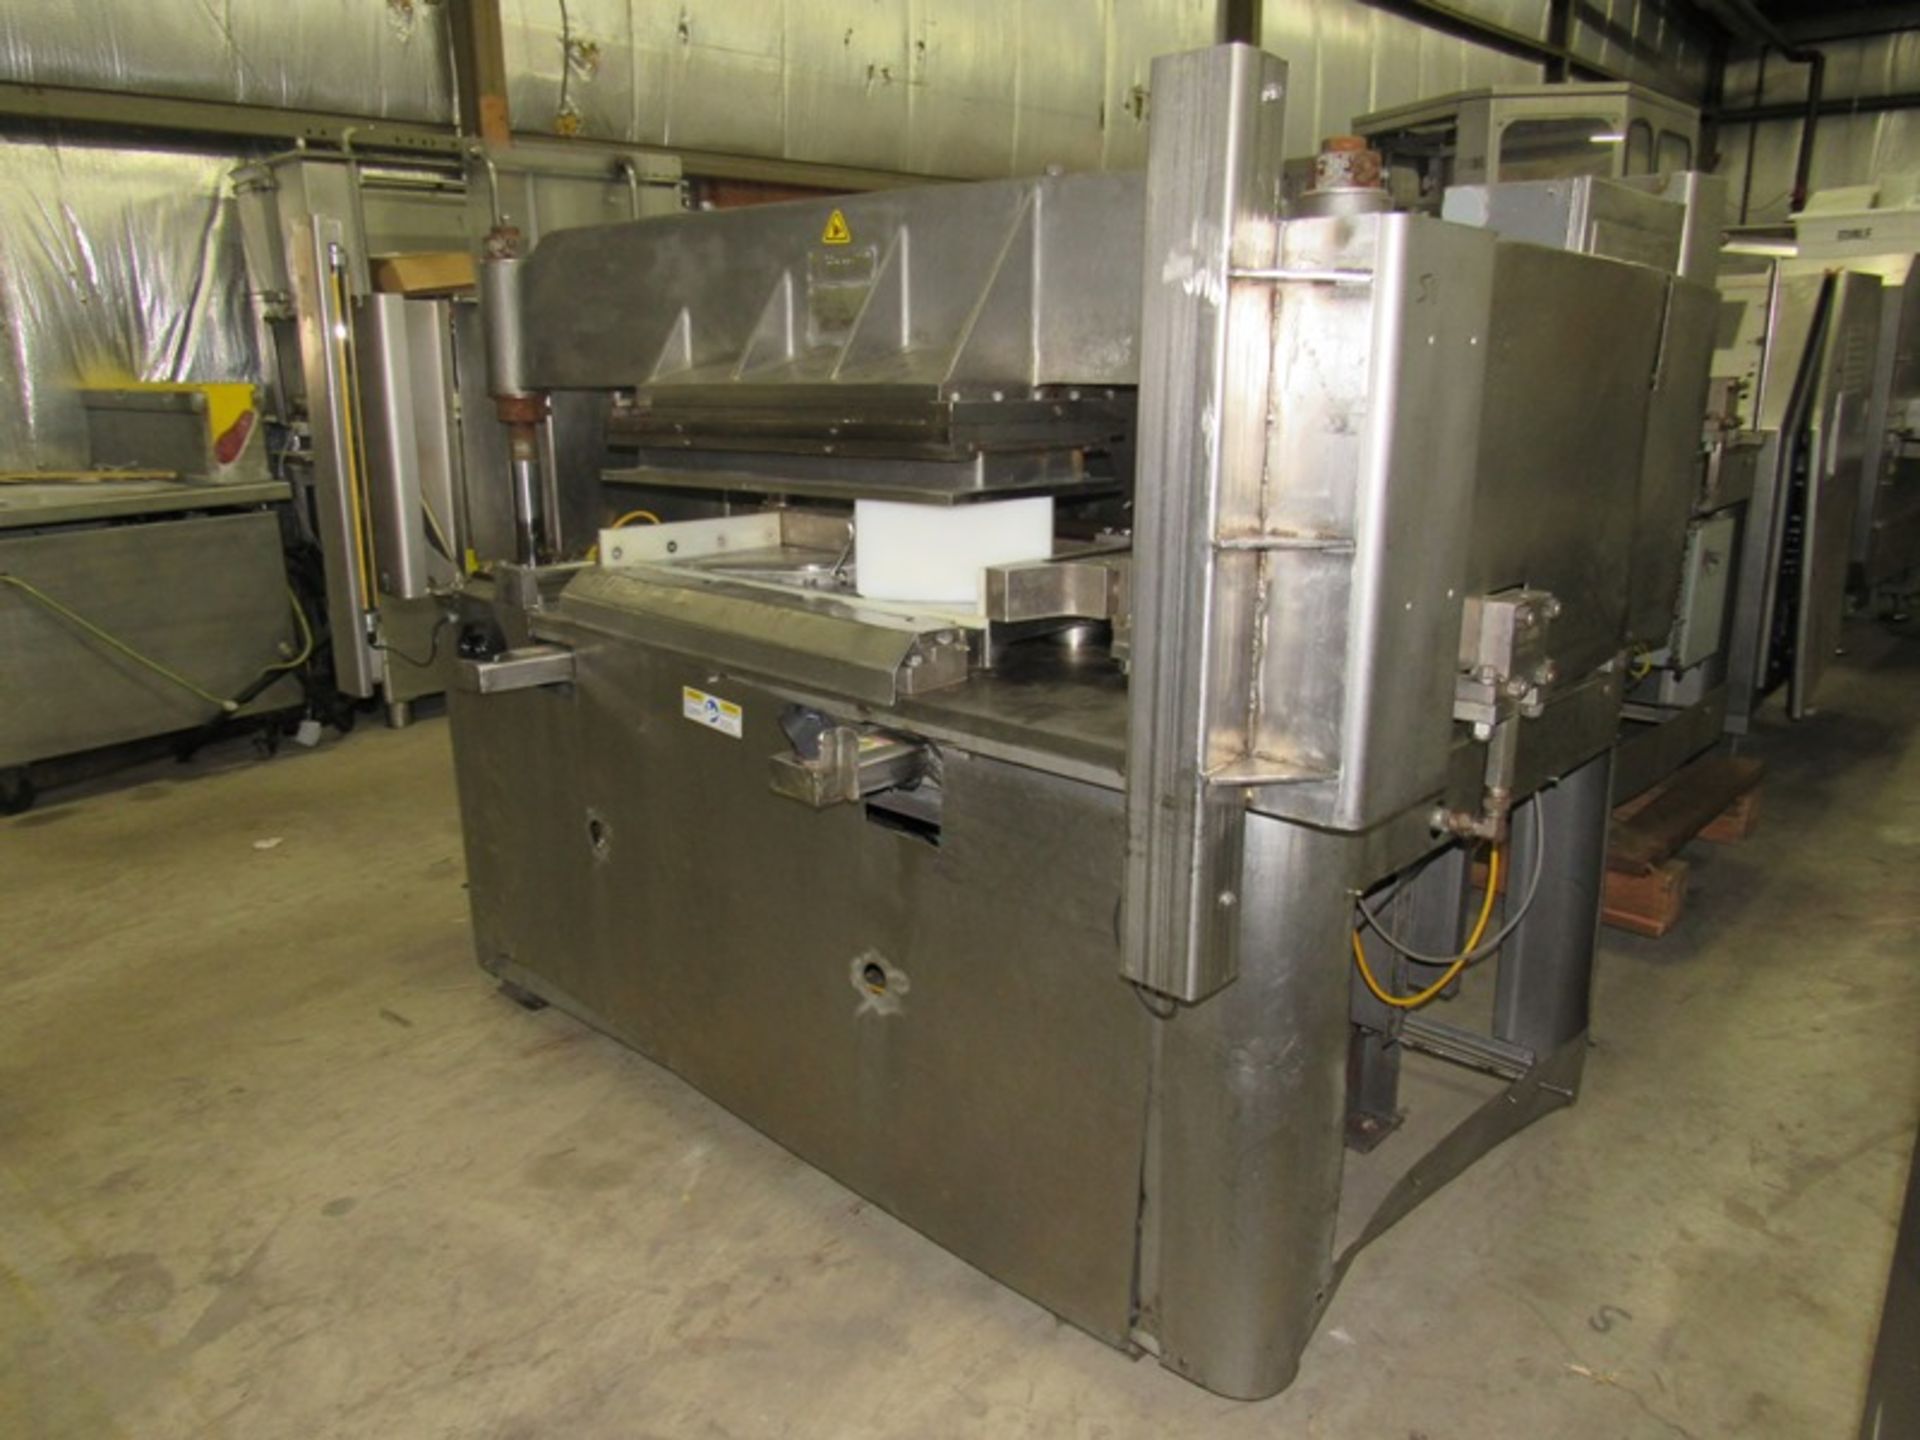 Anco Mdl. 1411 Bacon Press designed to press uniform thickness and width to maximize slicing yields, - Image 2 of 16